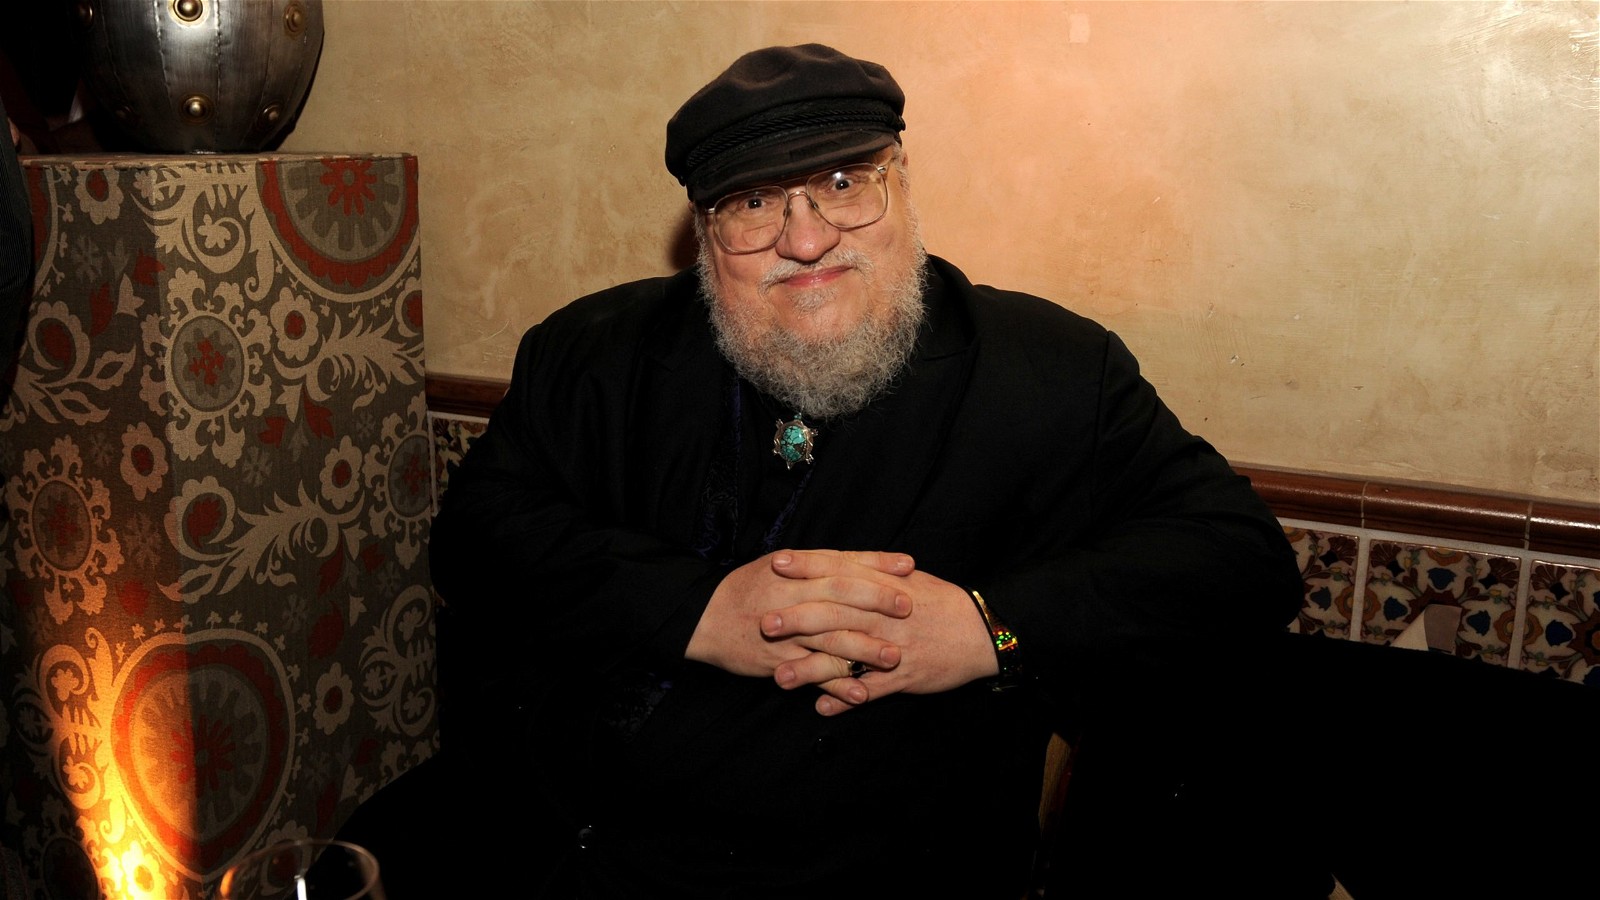 George R.R. Martin in an interview with NPR